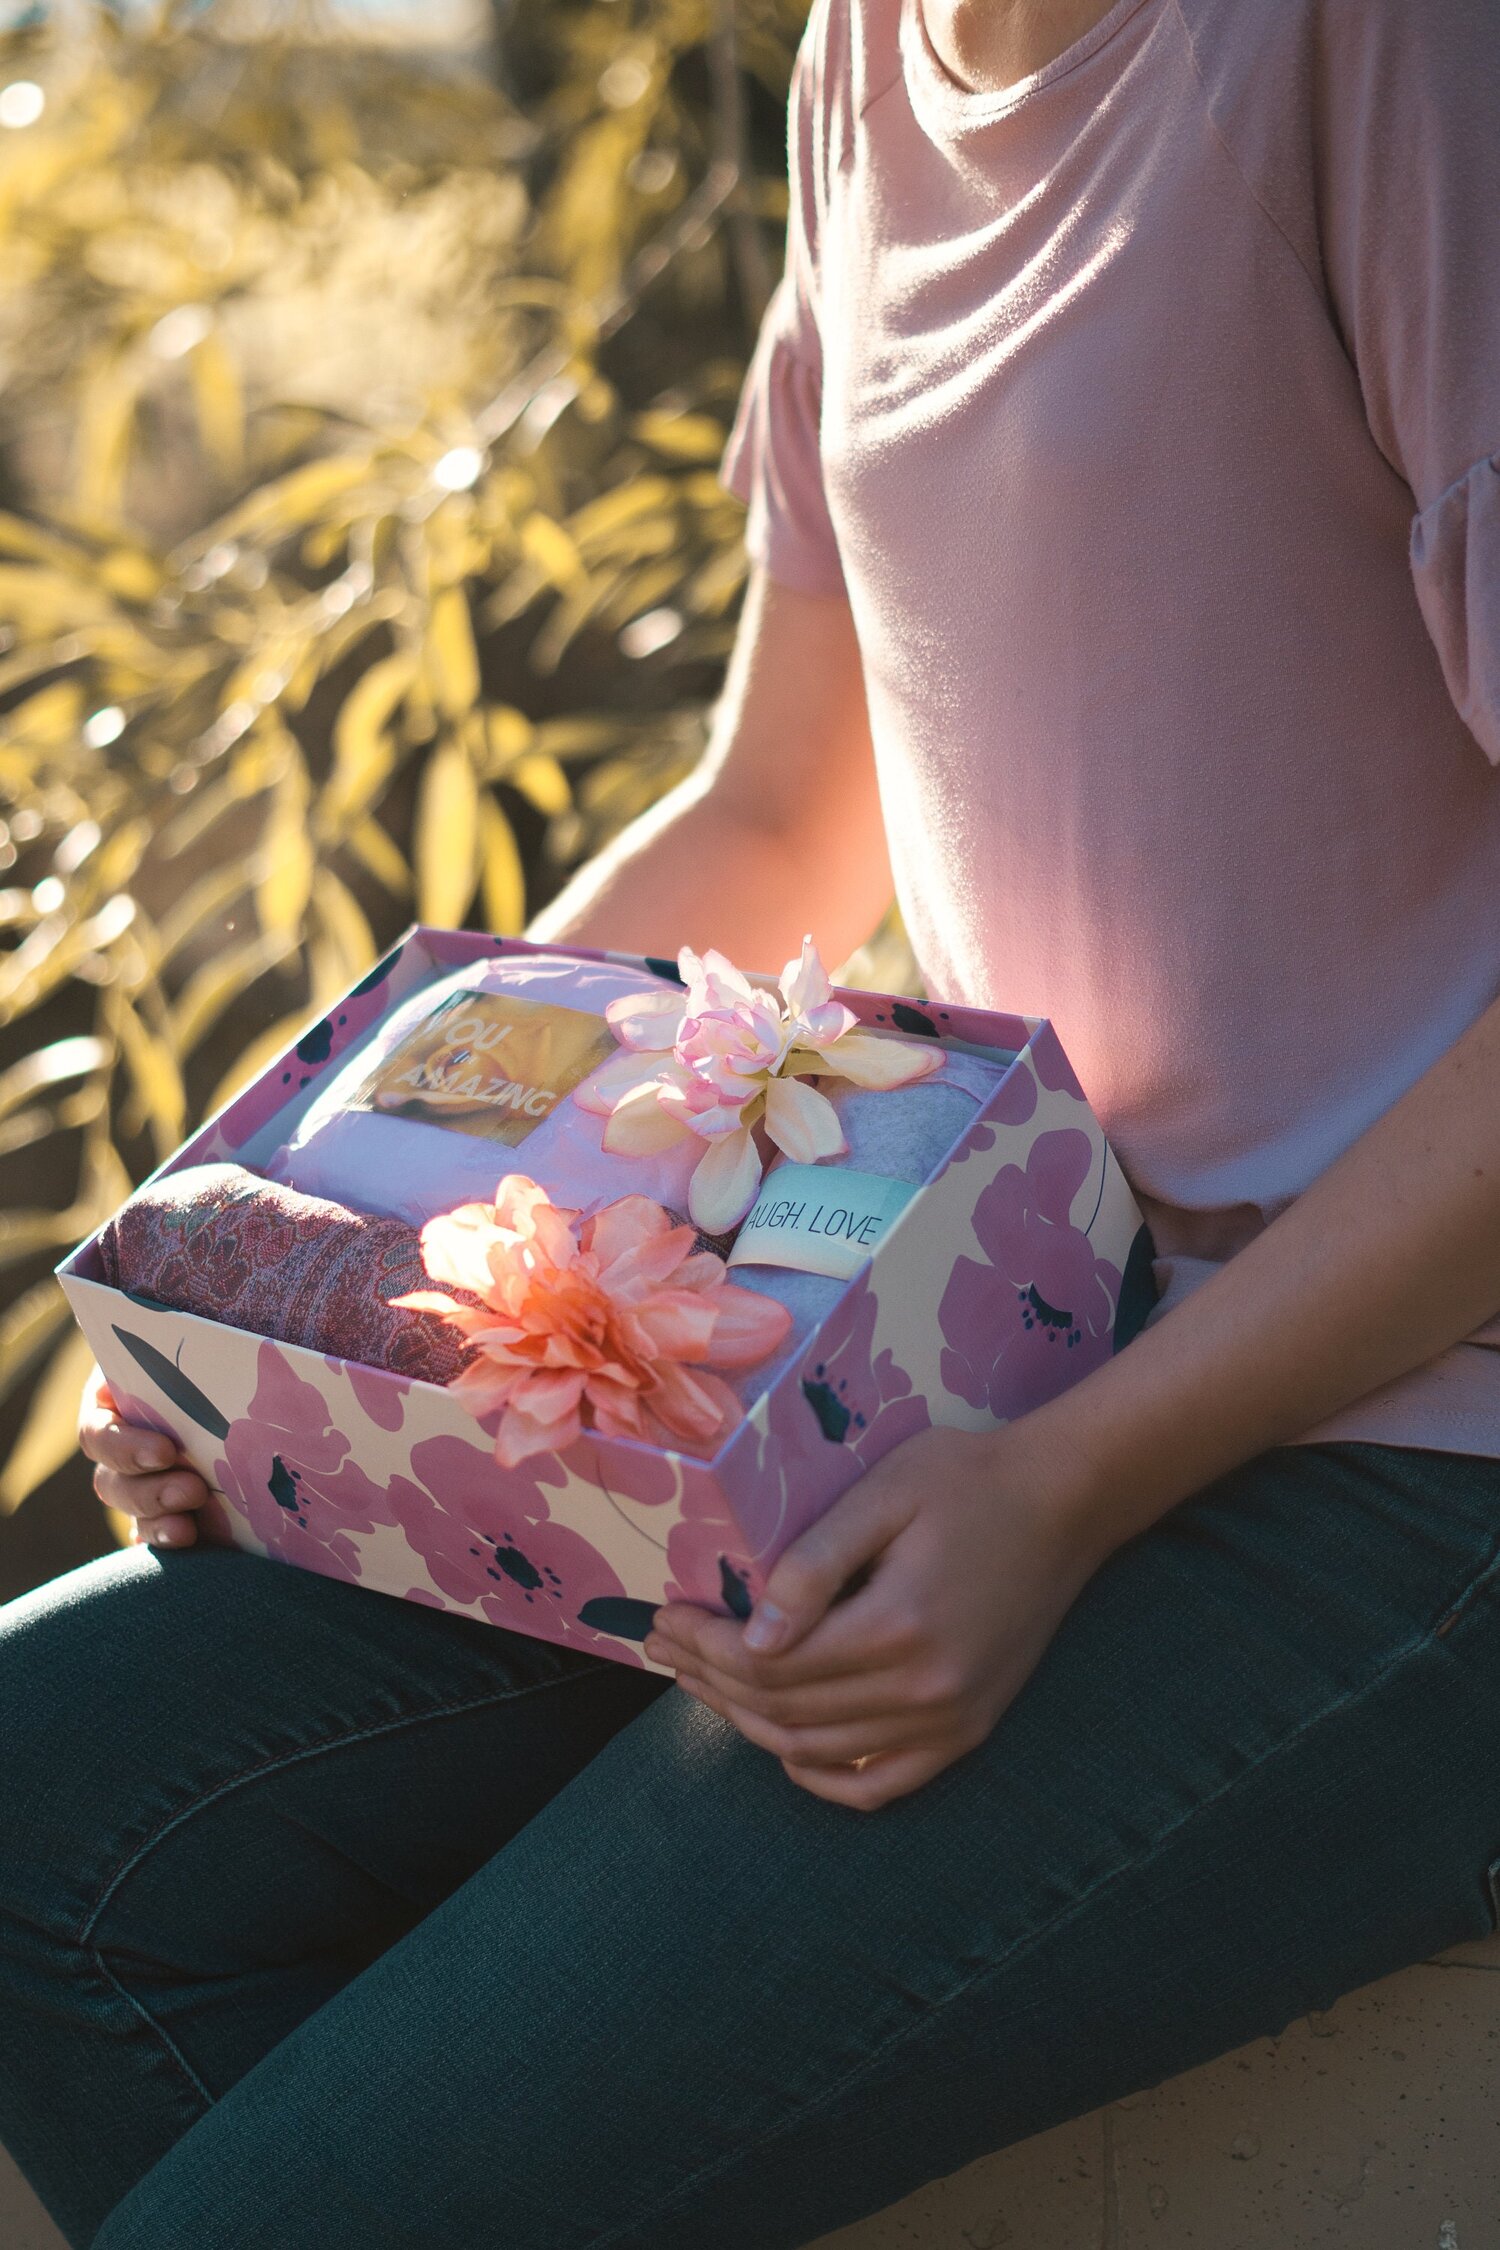 Thinking of You Gift. YouAreBeautifulBox. Care package. Gift Box Gift Set.  Gift for Her. Feel better box. Get Well — YouAreBeautifulBox